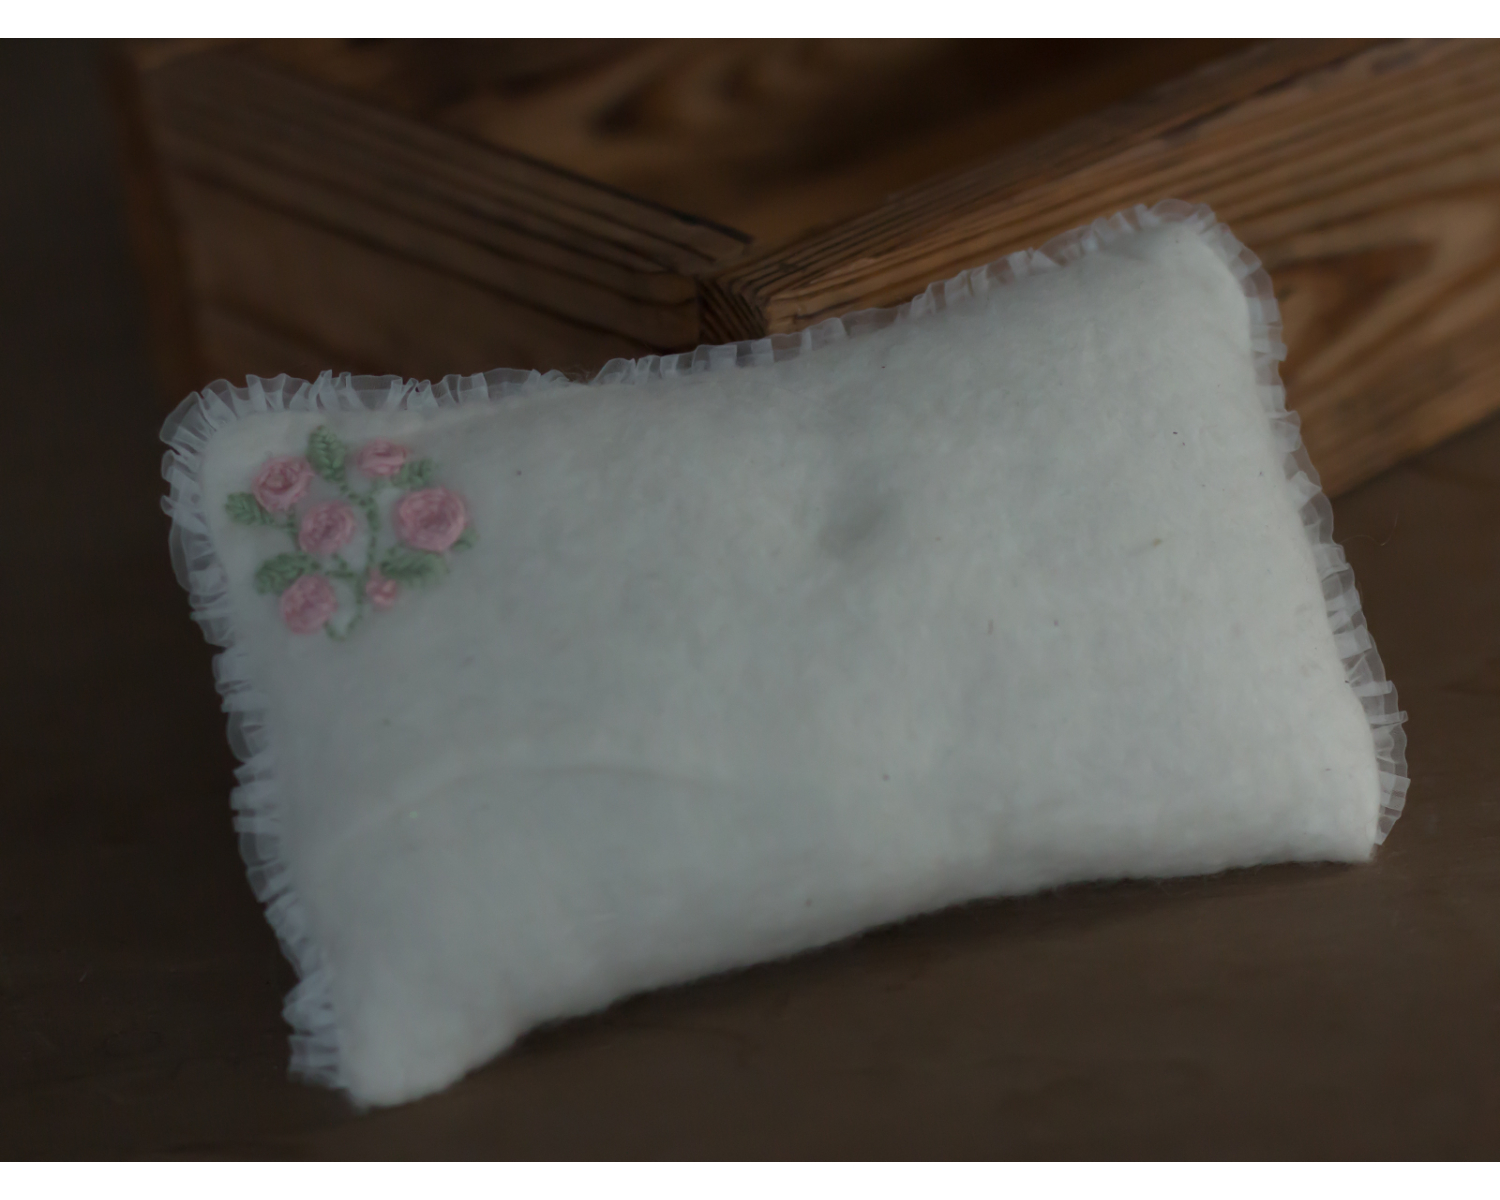 Felted Pillow with Flowers